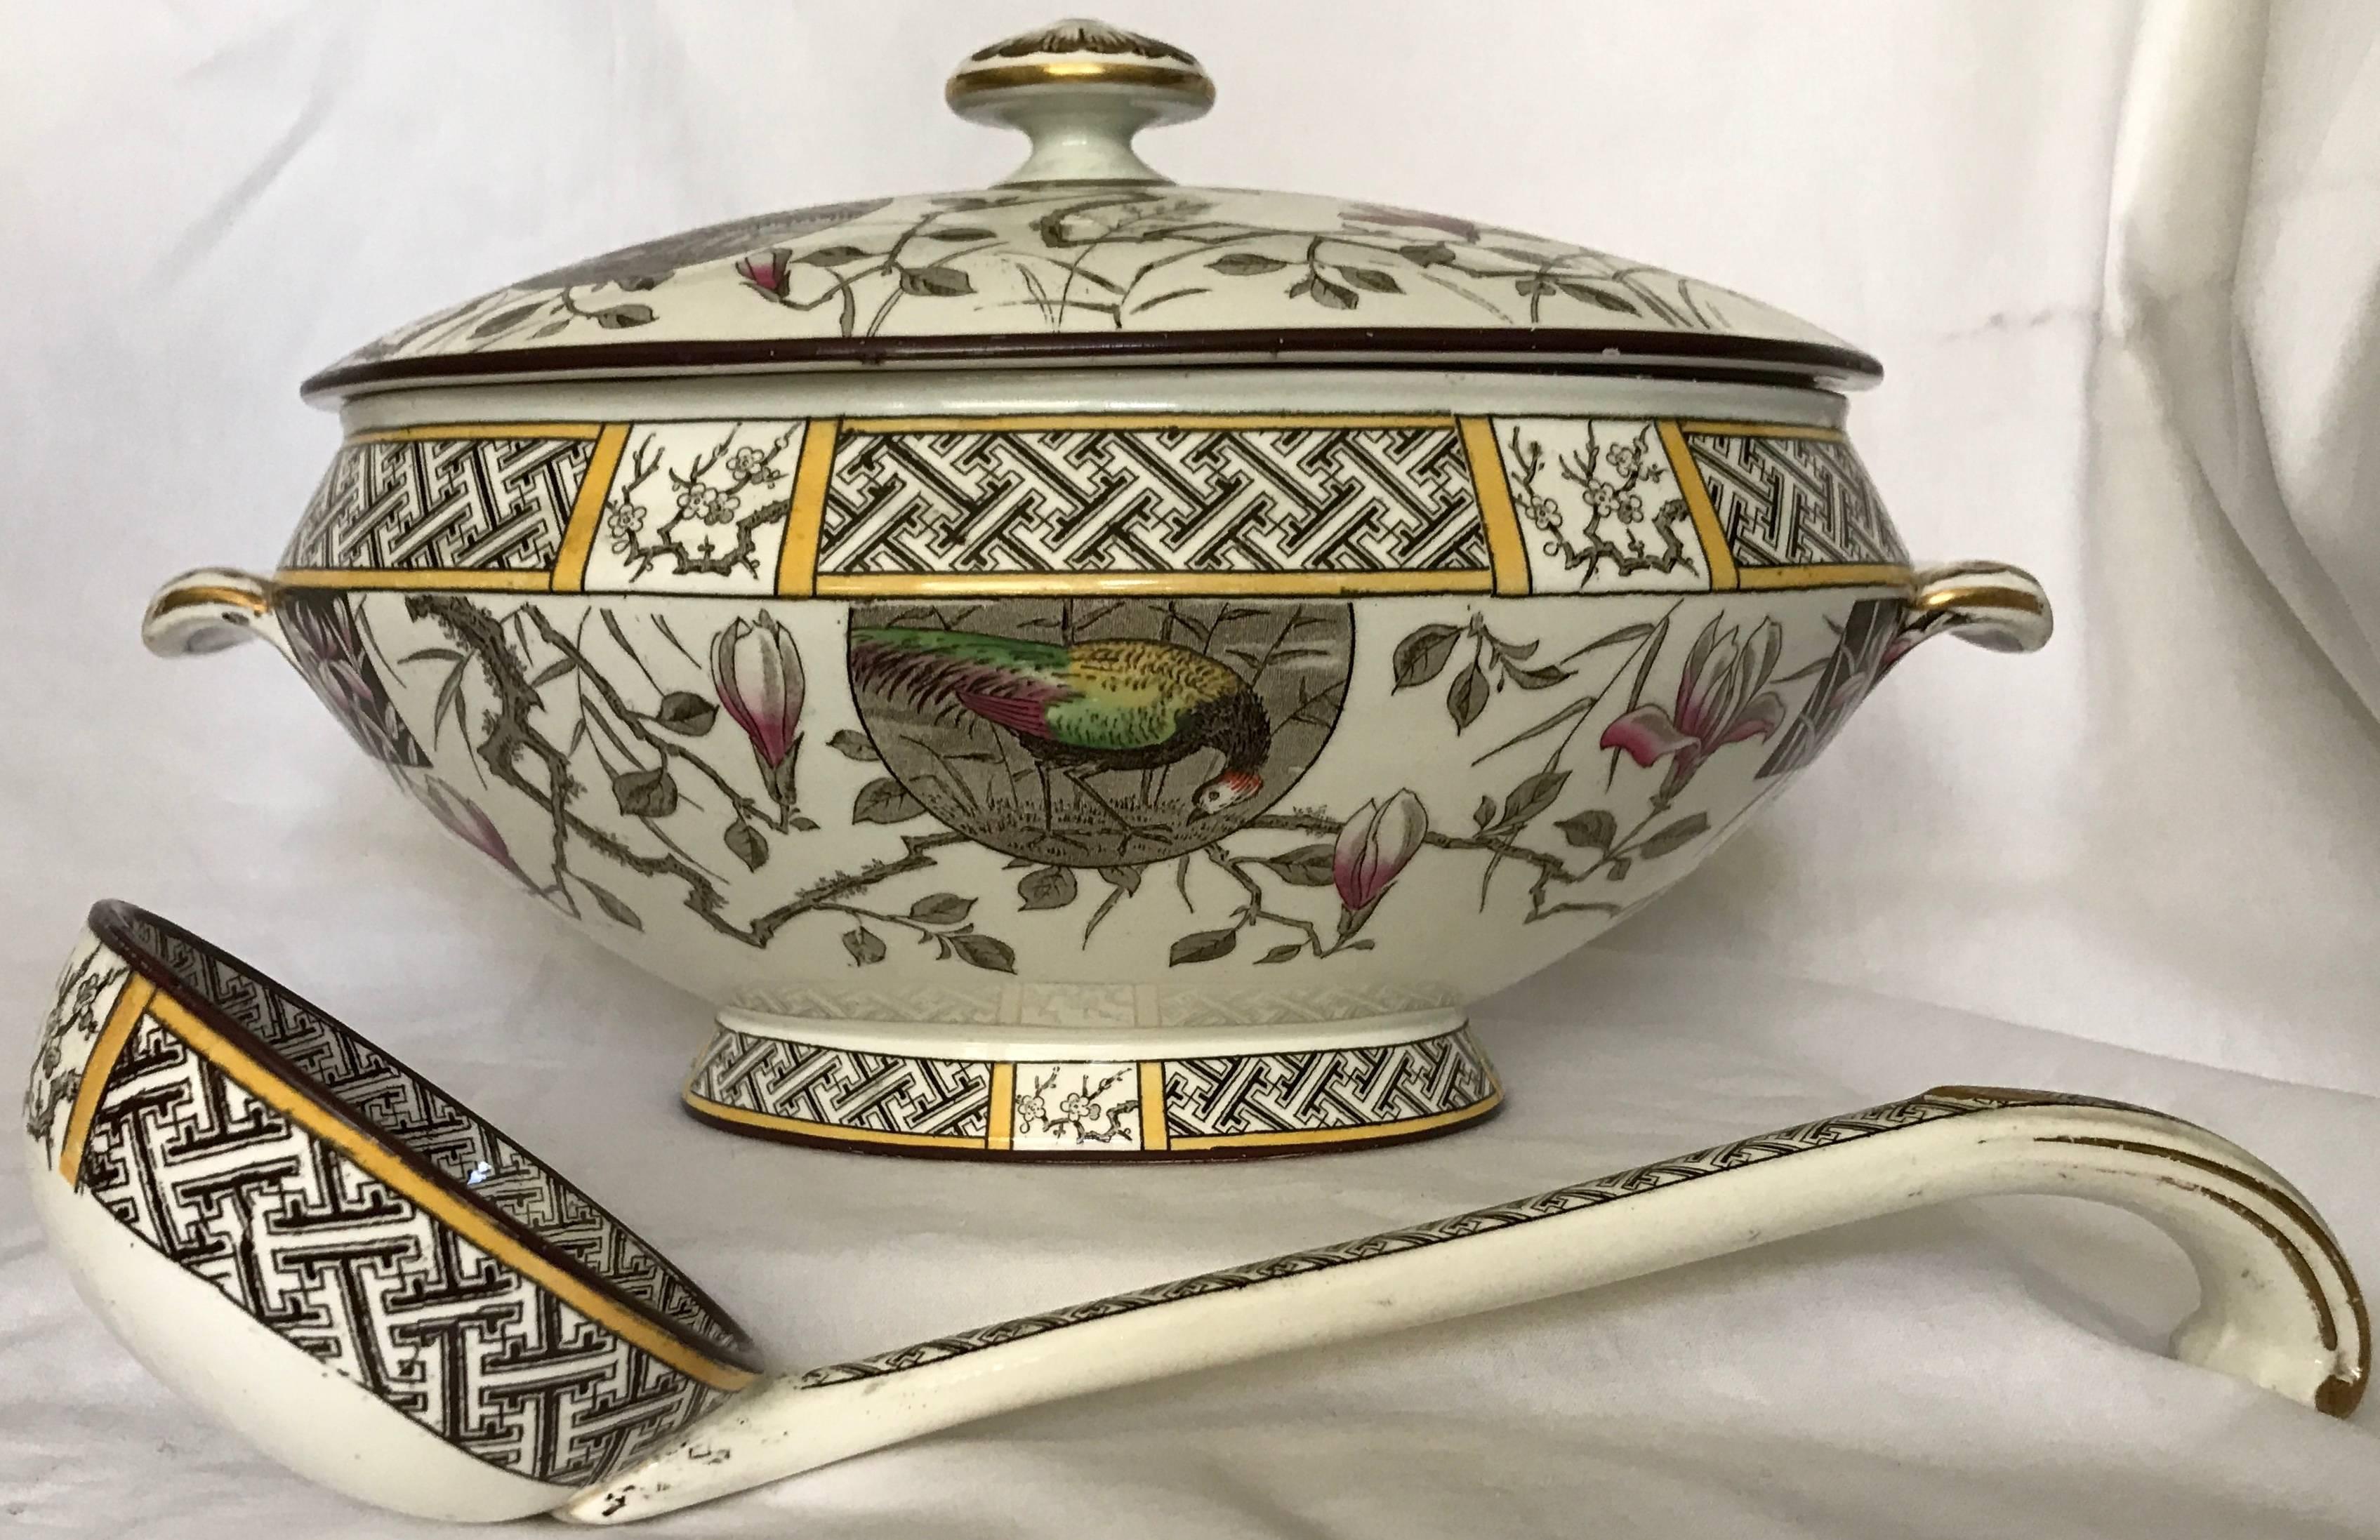 Aesthetic Movement soup tureen with ladle. Aesthetic Movement soup tureen with ladle and cover in brown, yellow and green Faisan pattern with tulip and cherry blossom branches. Markings for Minton 